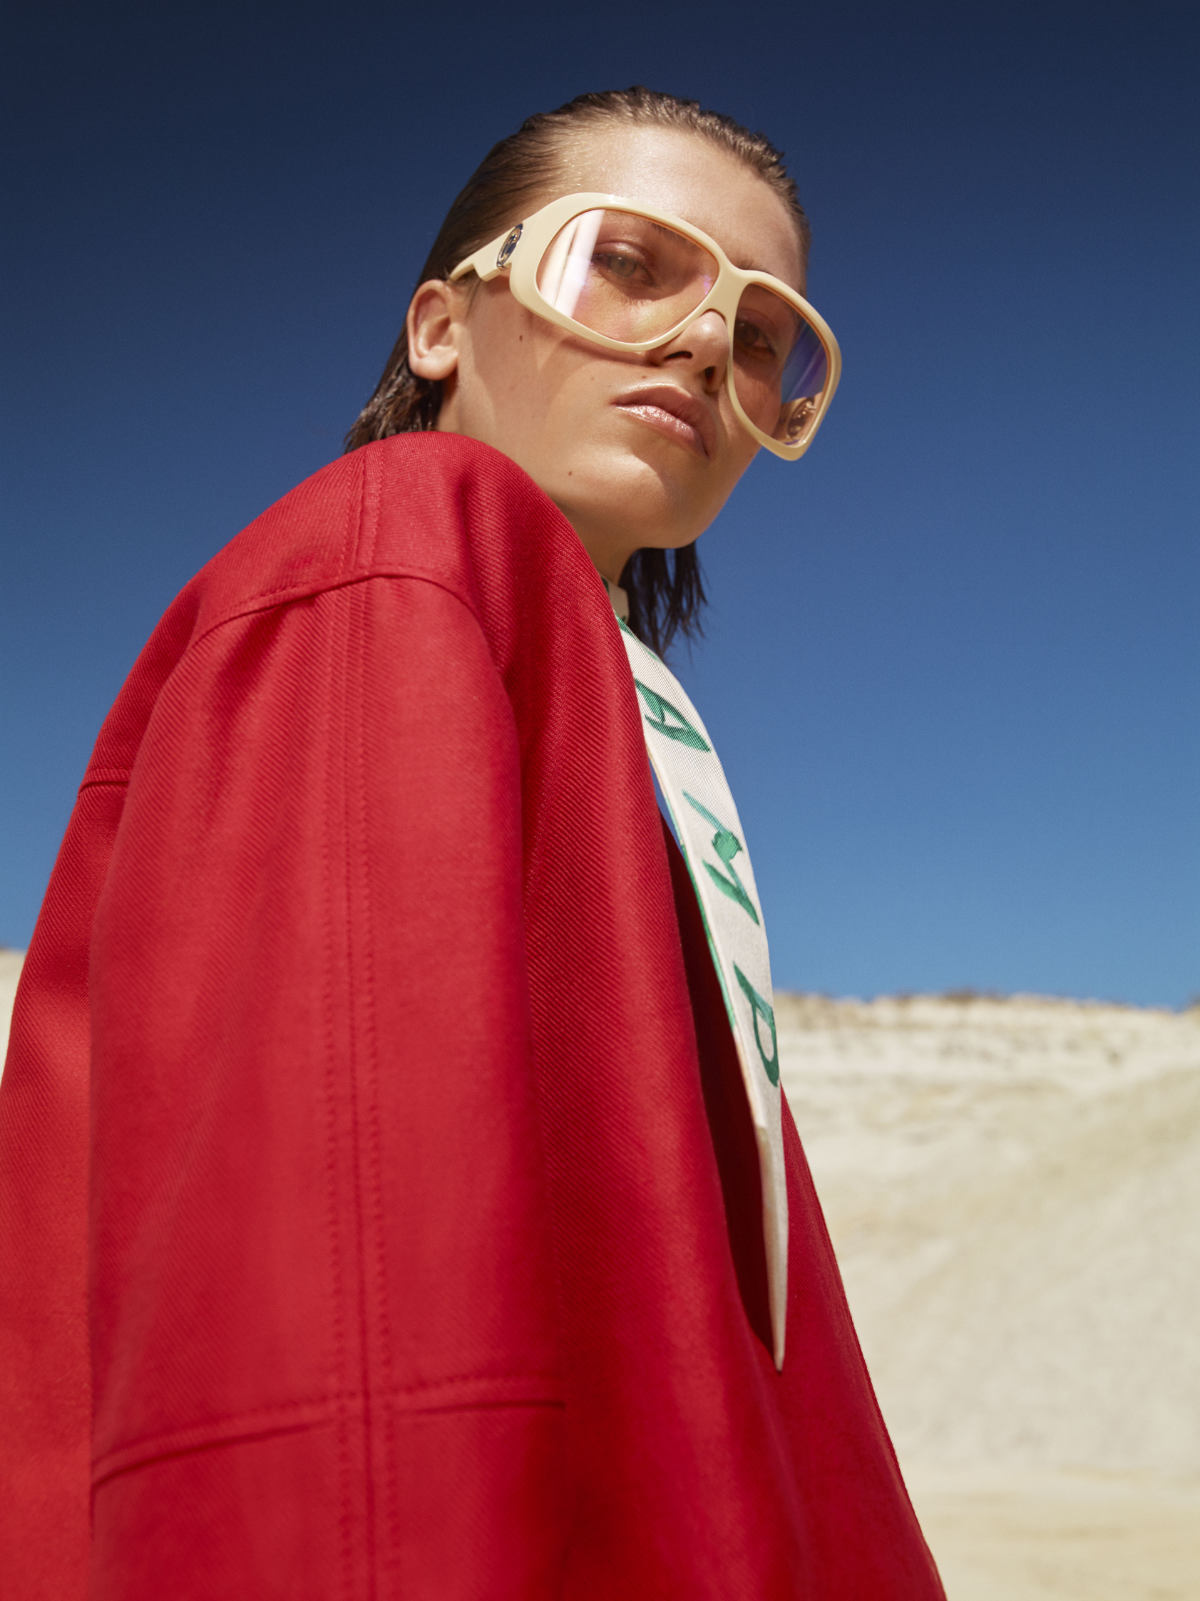 Longchamp Presents Its New Spring-Summer 2023 Collection